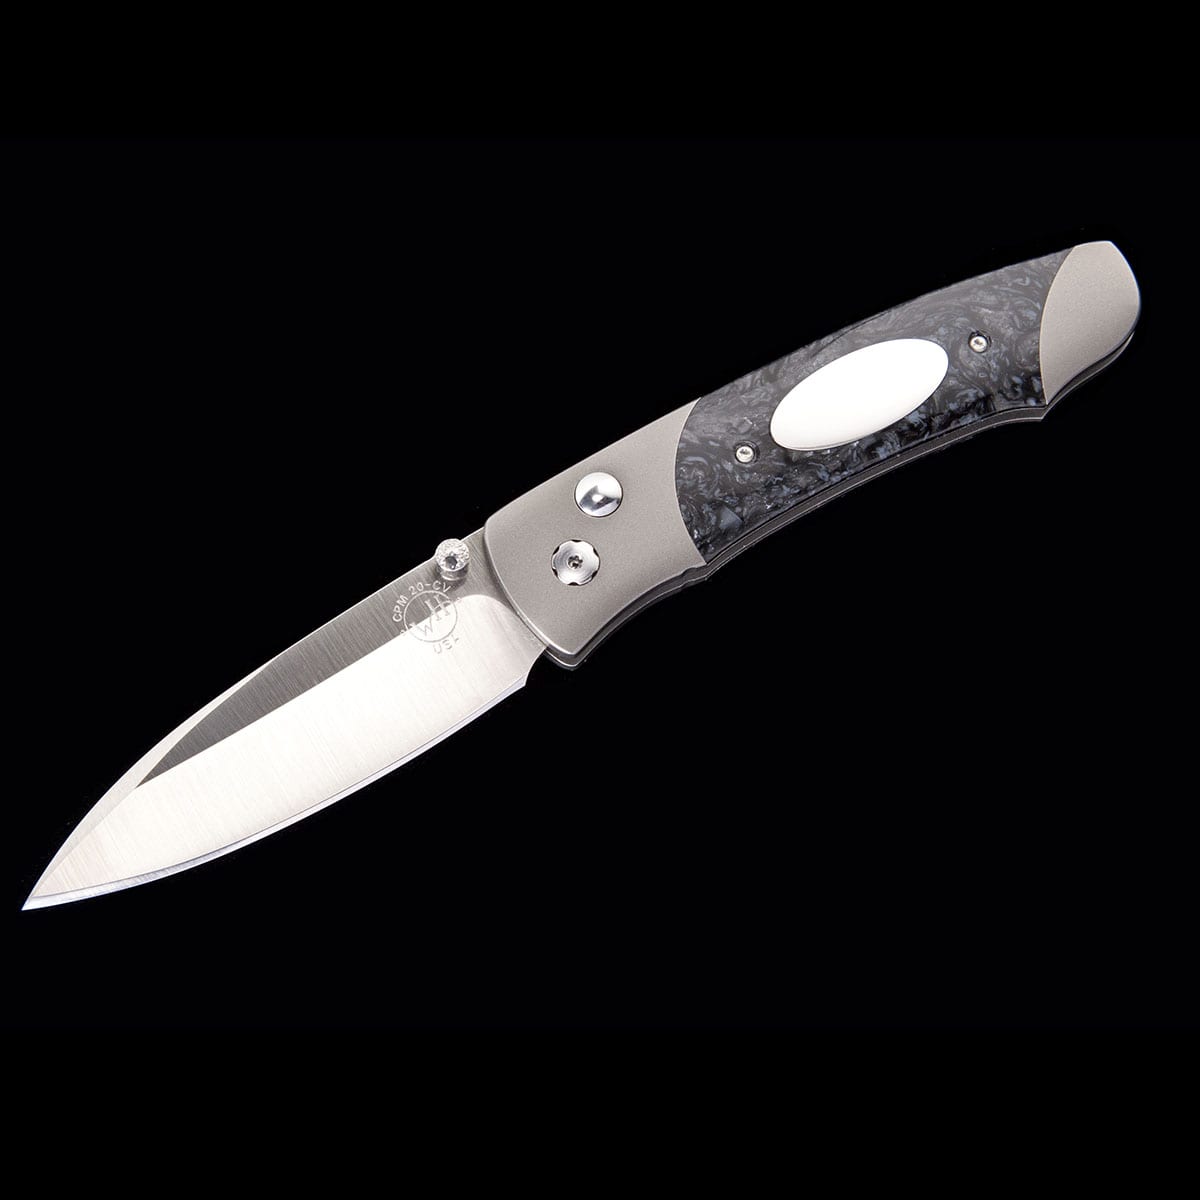 A200-1E Knife by William Henry Studio